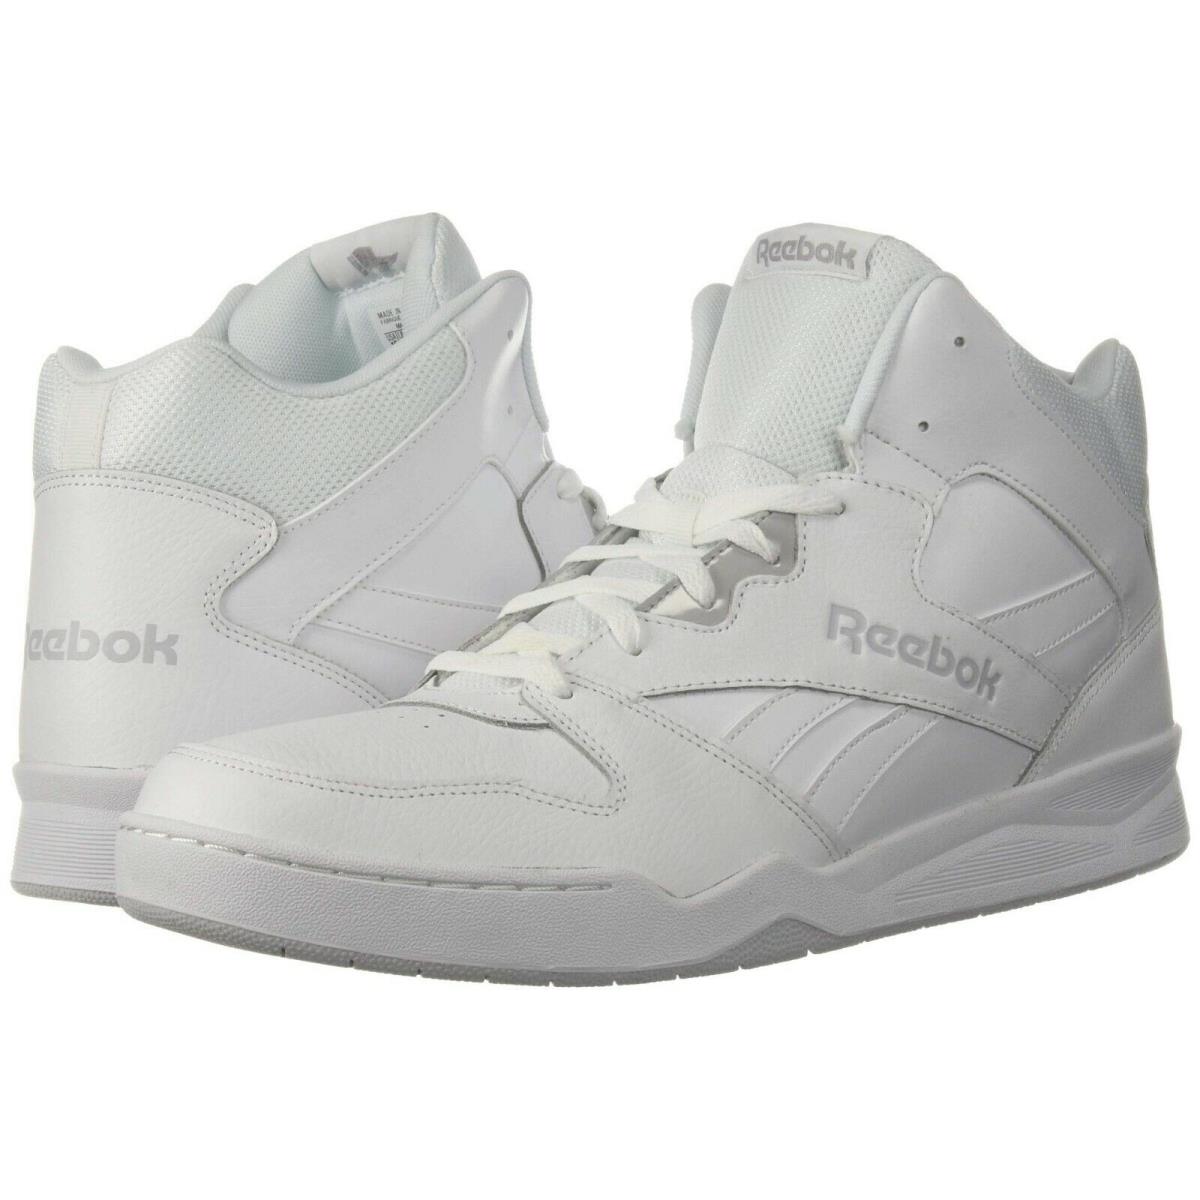 Reebok Men`s High-top Basketball Leather Shoes Motion Control Rubber Outsole White